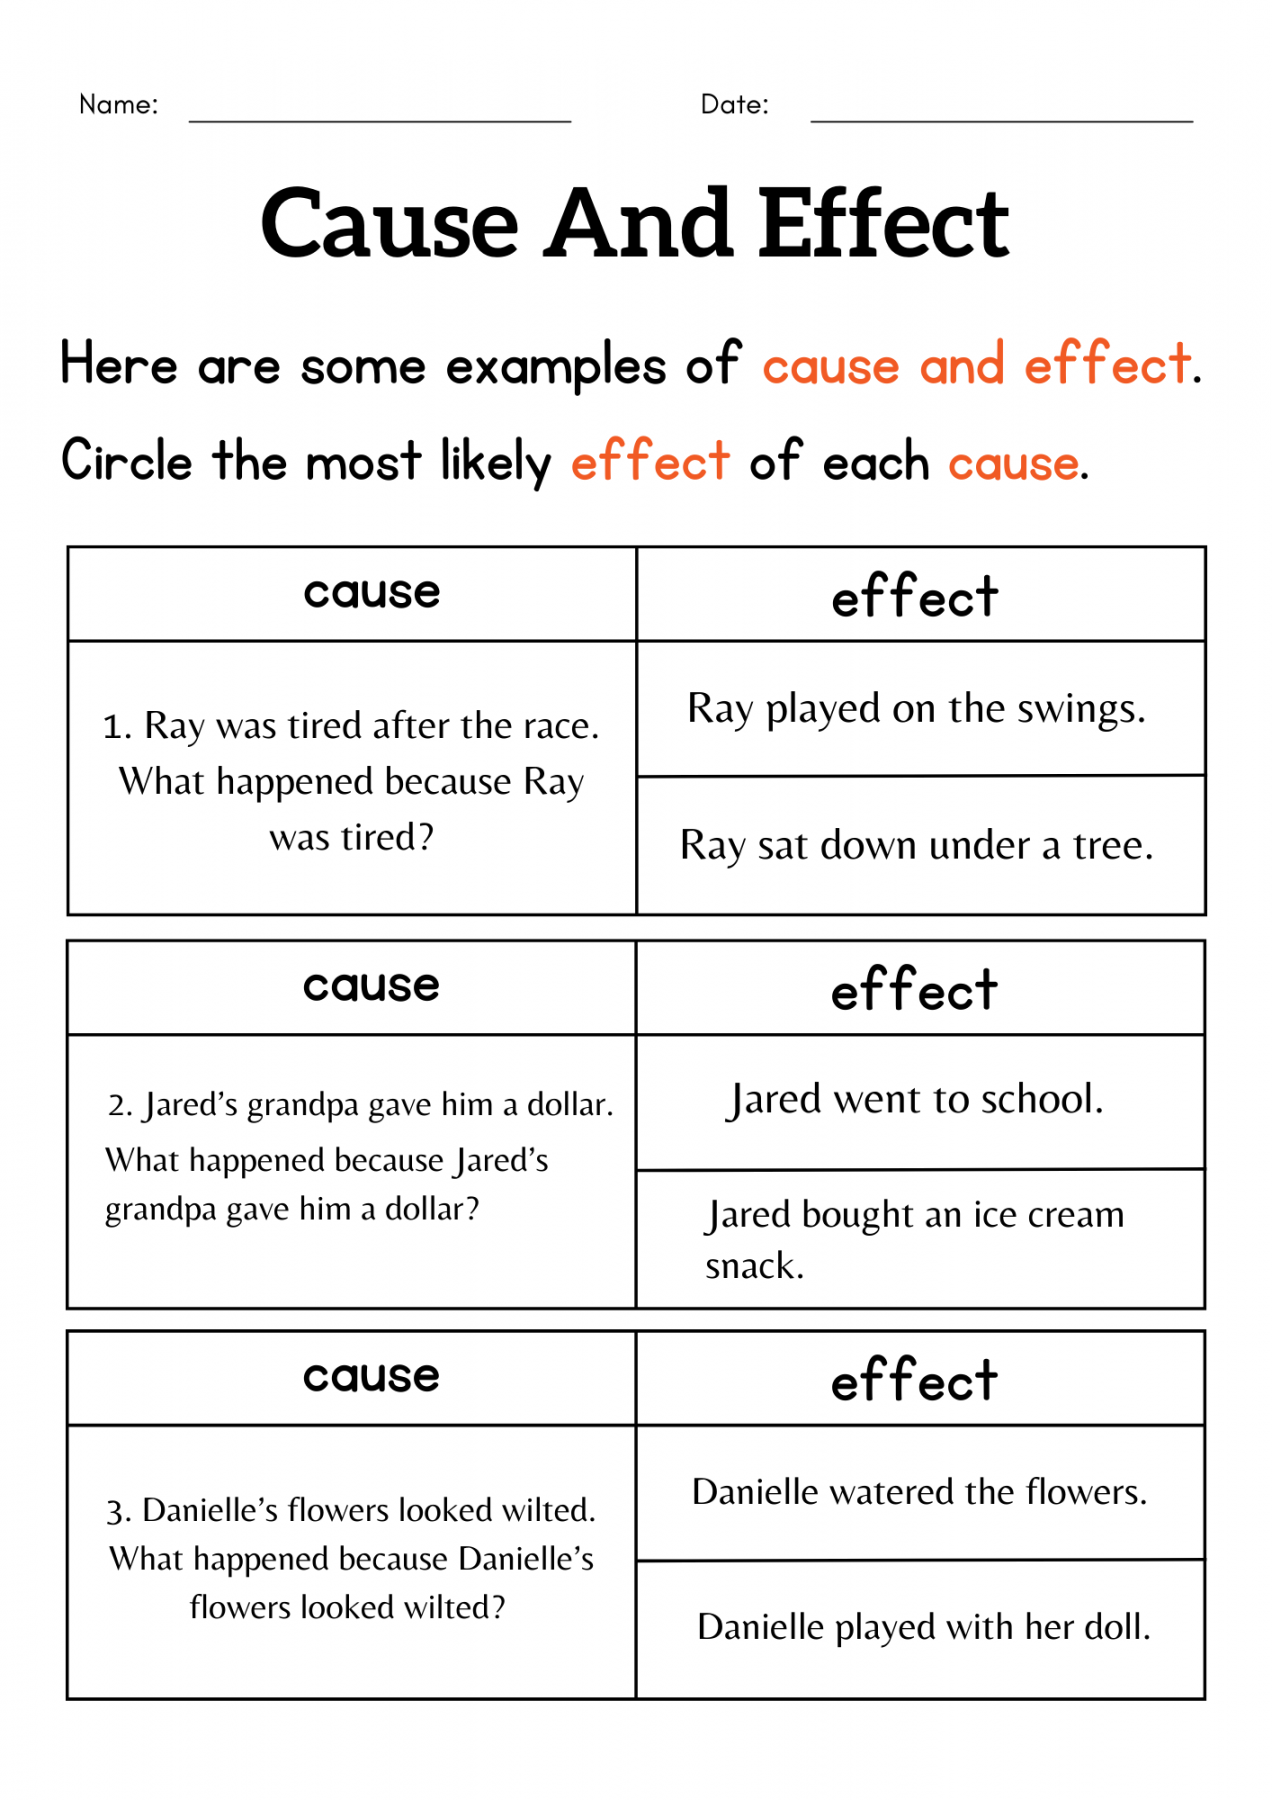 st grade cause and effect worksheet - Cause and effect activity sheets for  kids